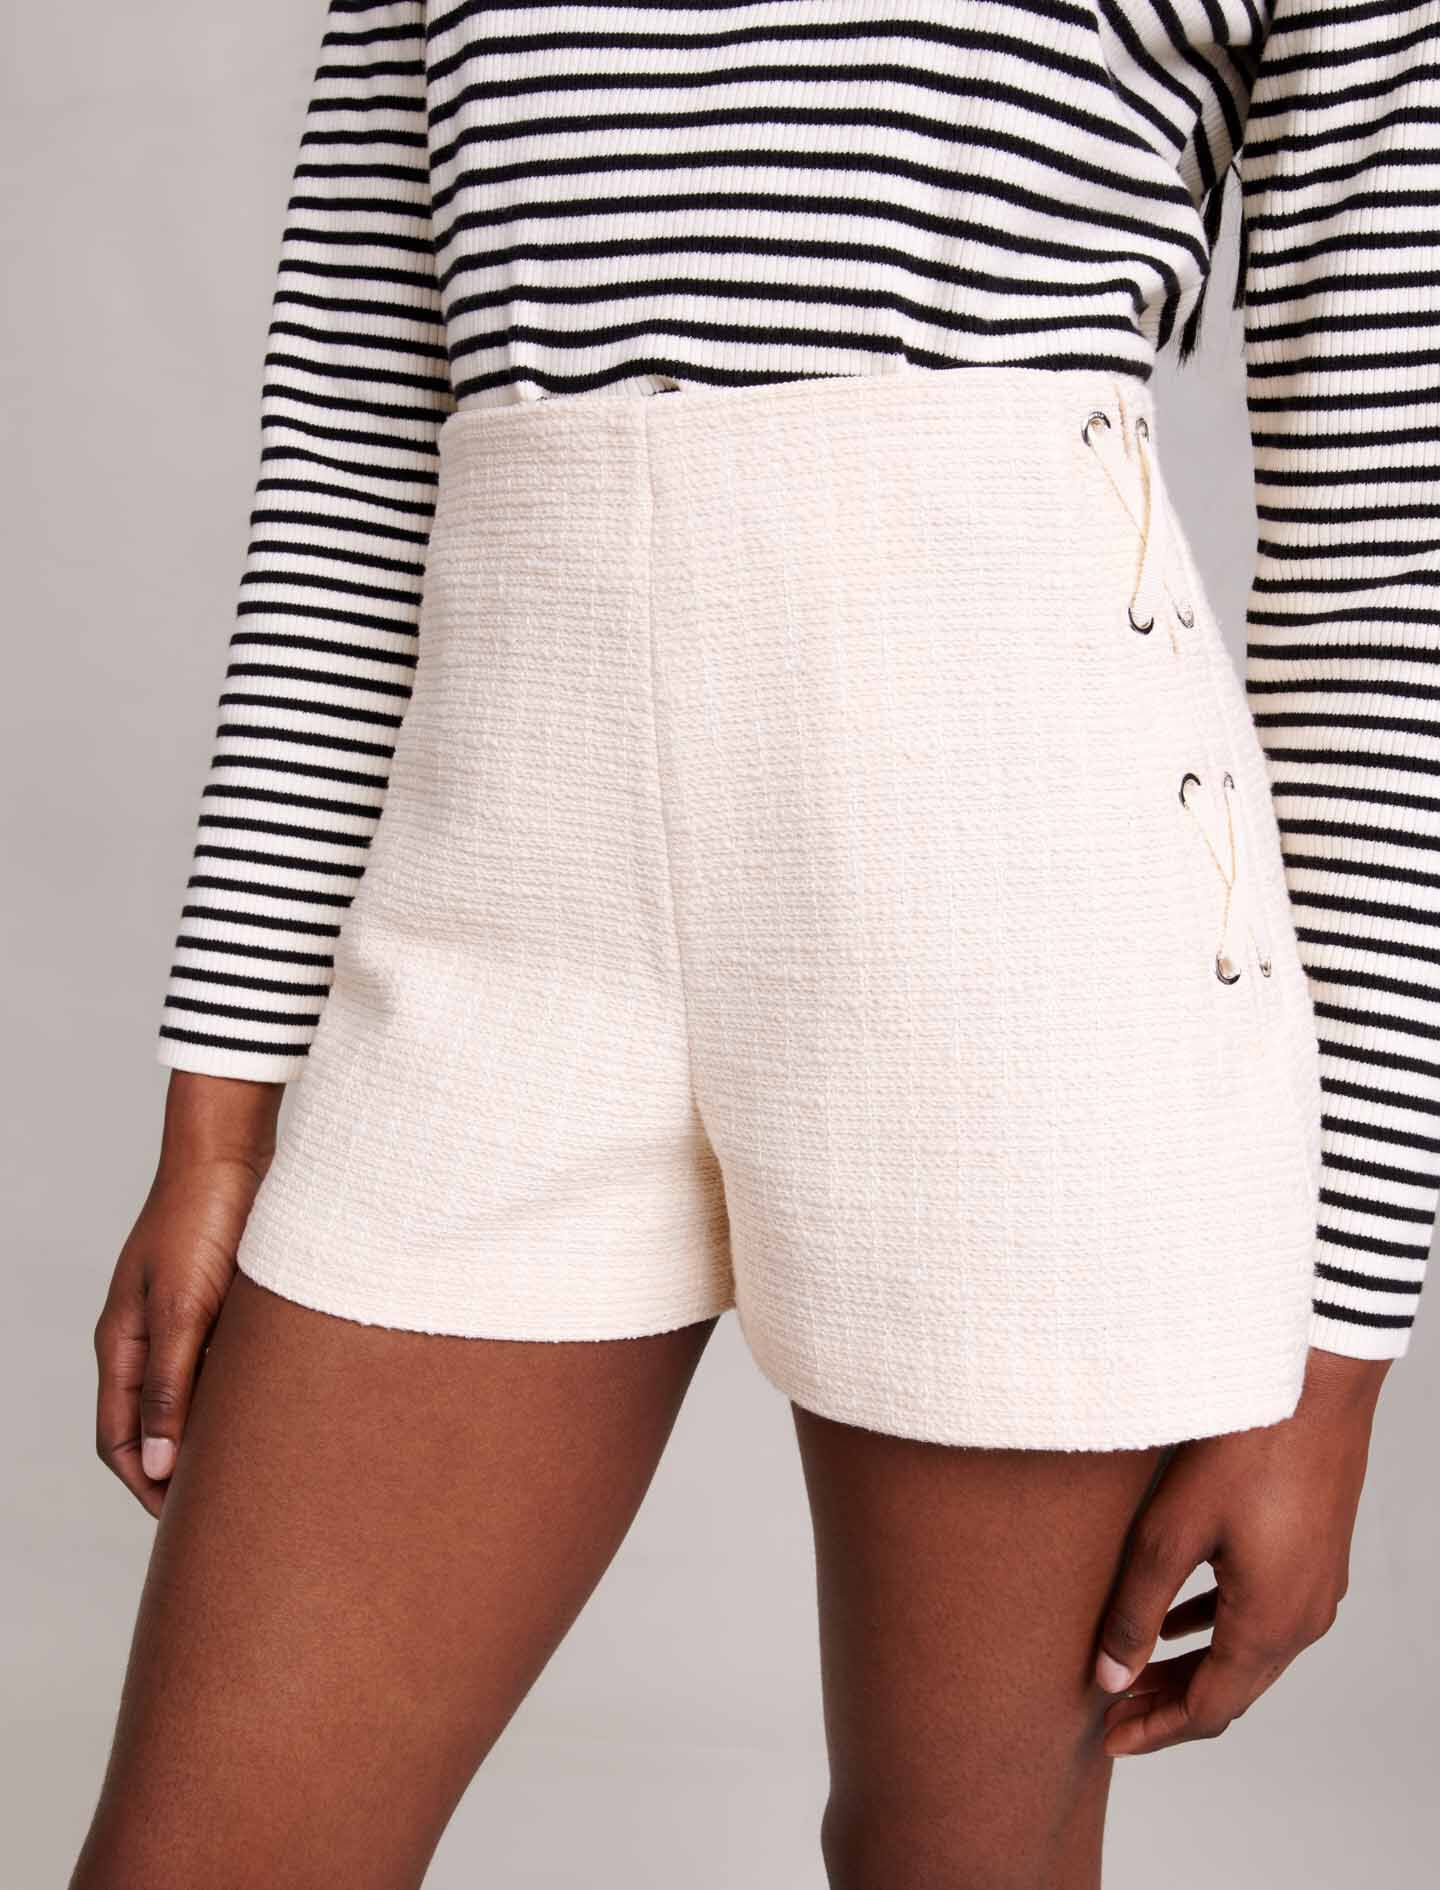 123IVILENO A-line shorts in tweed - Skirts & Shorts - Maje.com